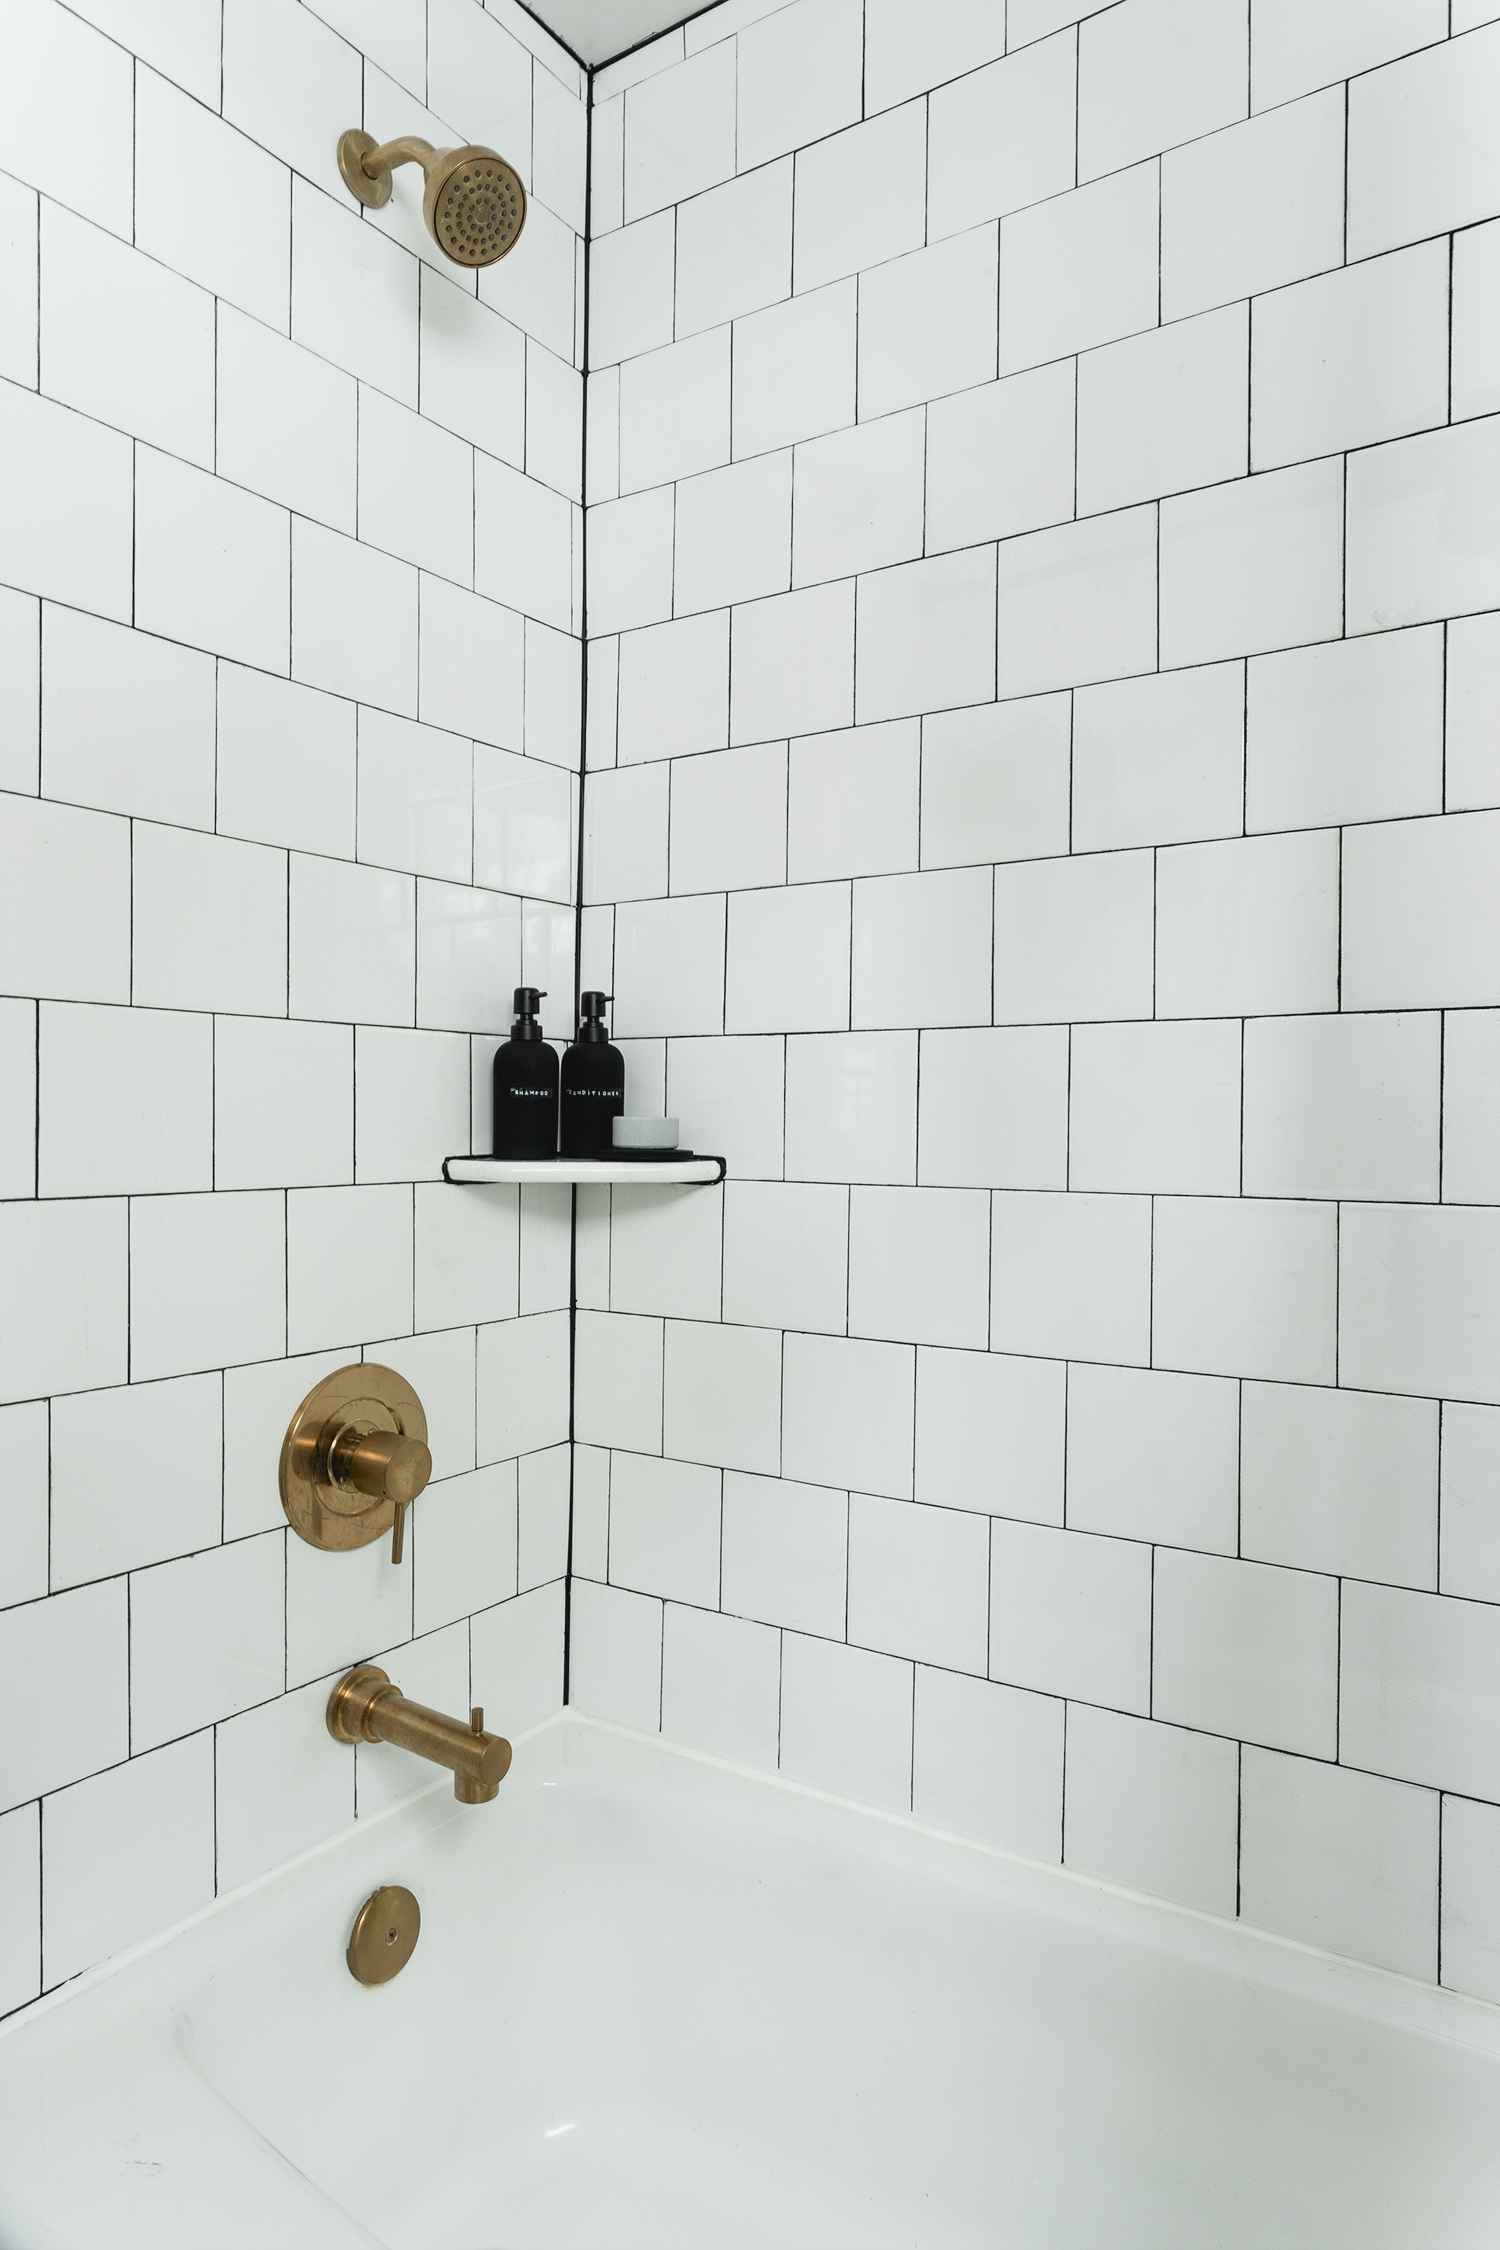 How To Install A Corner Shelf In A Tile Shower Try This : Add a Corner Shelf to your Shower - Deuce Cities Henhouse